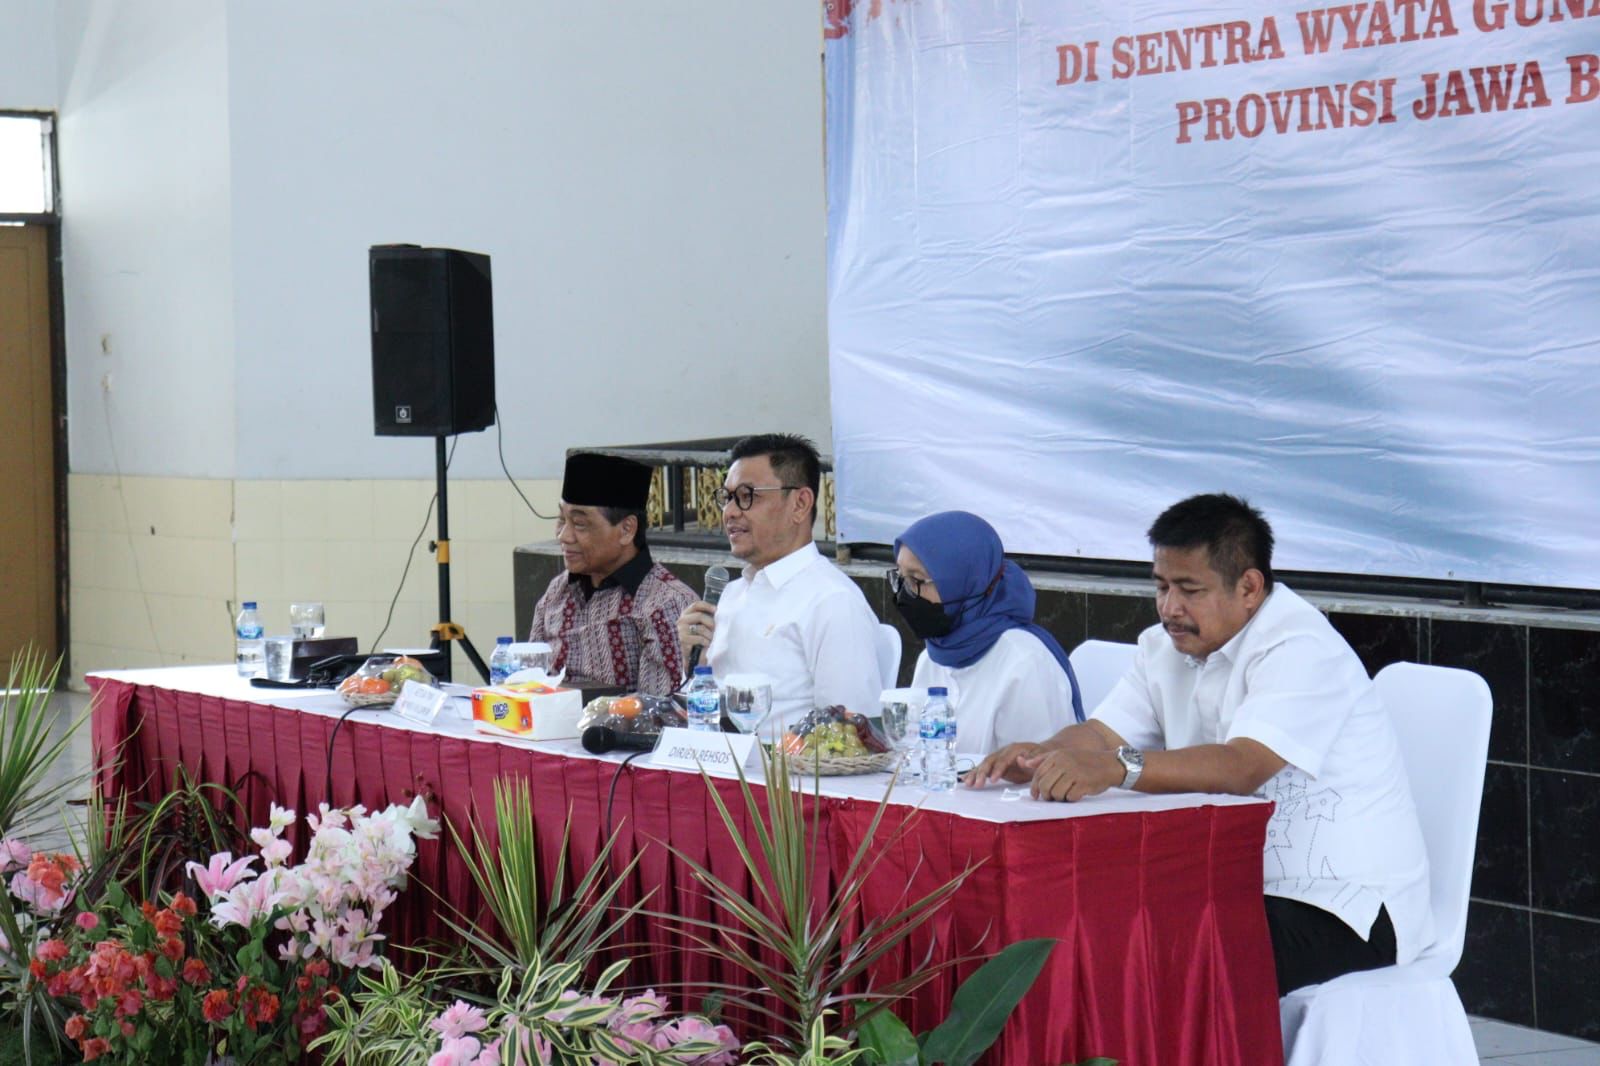 Working Visit of Commission VIII of the Indonesian House of Representatives for Reviewing the Elderly Welfare Bill